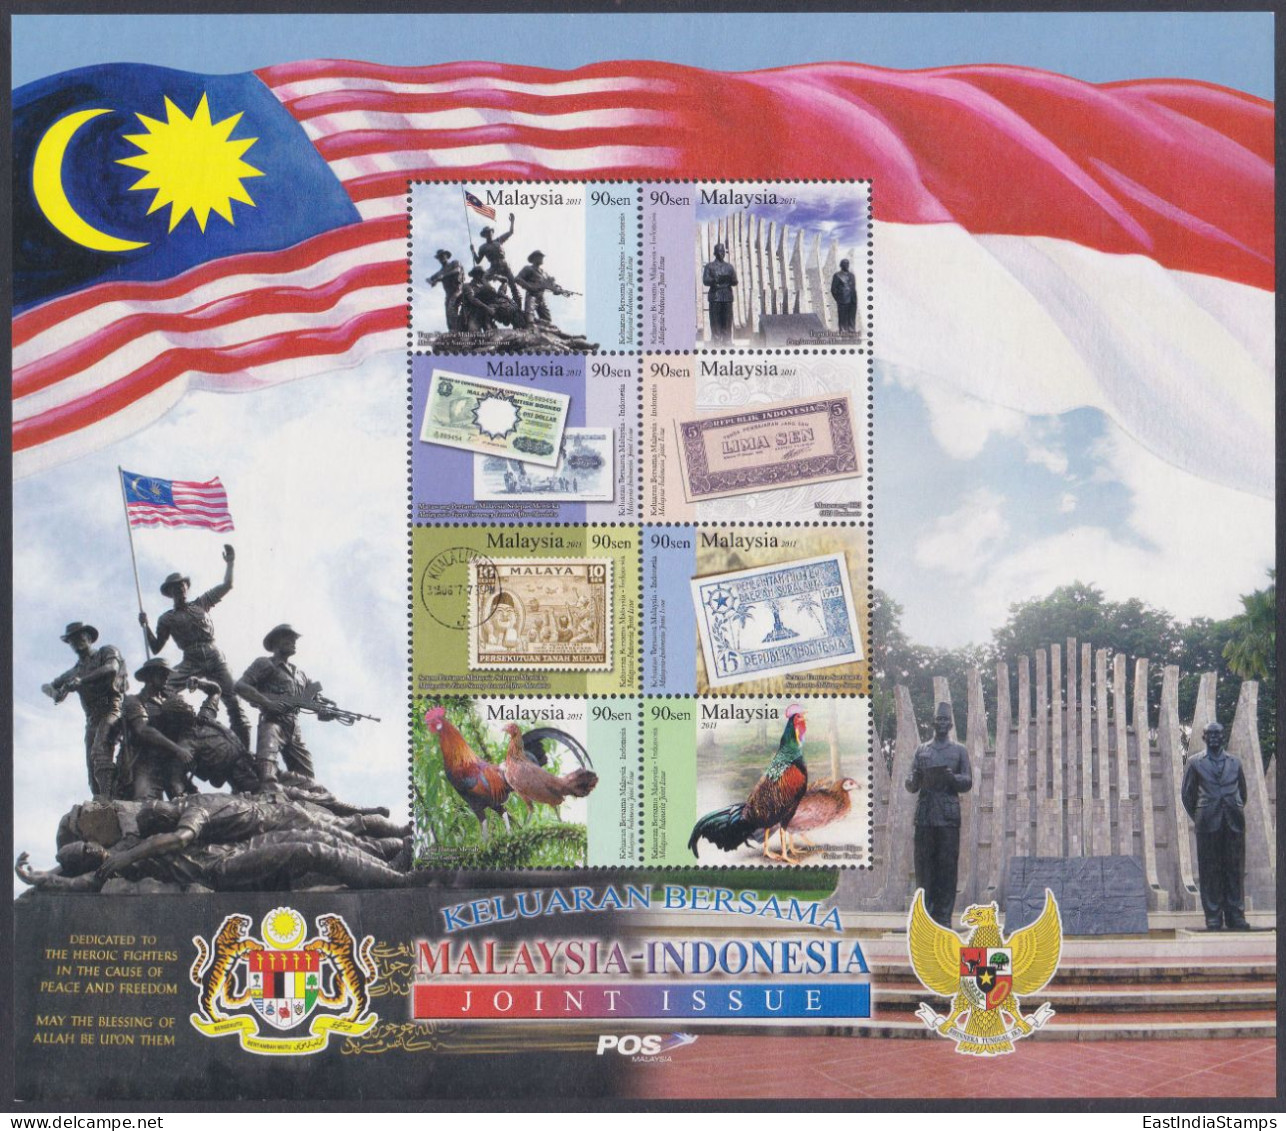 Malaysia 2011 MNH Joint Issue With Indonesia, Banknote, Flag, Soldiers, Chicken, Fowl, Rooster, Stamps On Stamp, Statue - Malasia (1964-...)